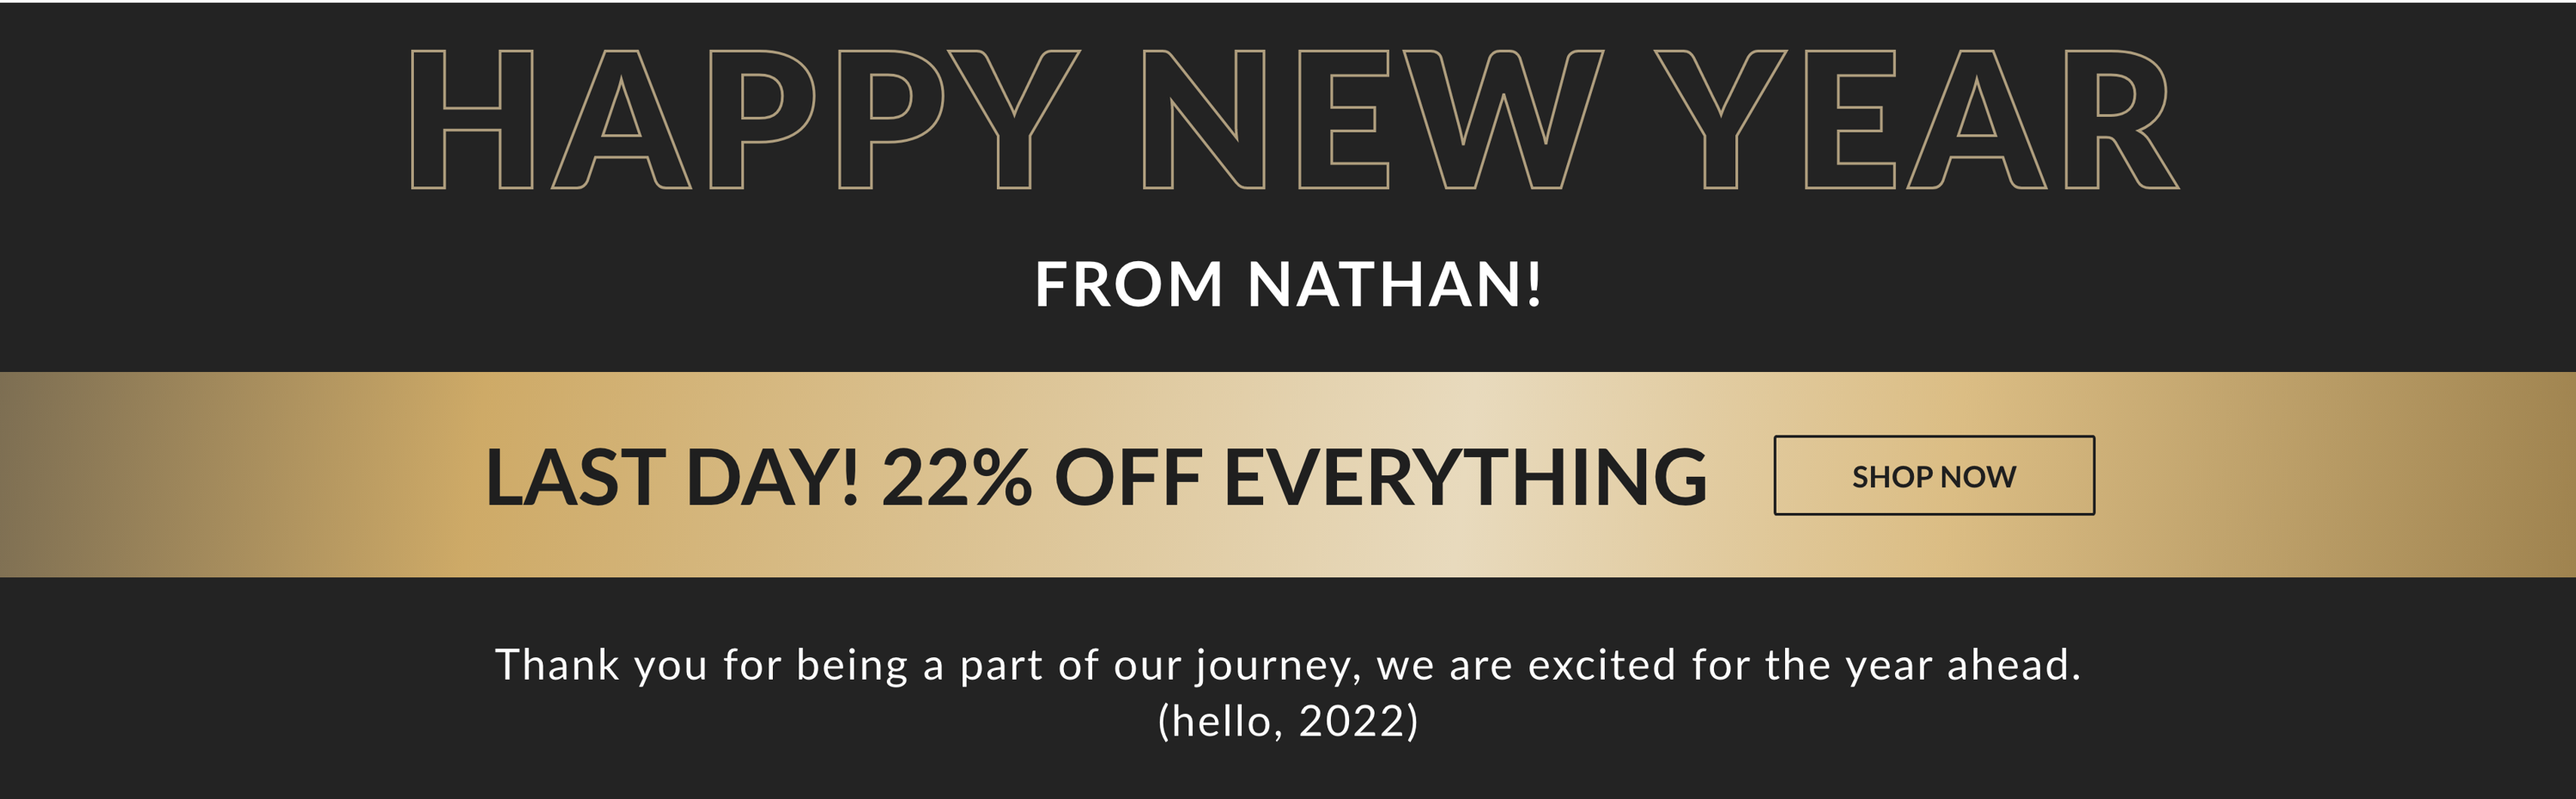 Happy New Year from Nathan! Last Day! 22% Off Everything. Shop Now. Thank you for being a part of our journey, we are excited for the year ahead. (Hello, 2022!)